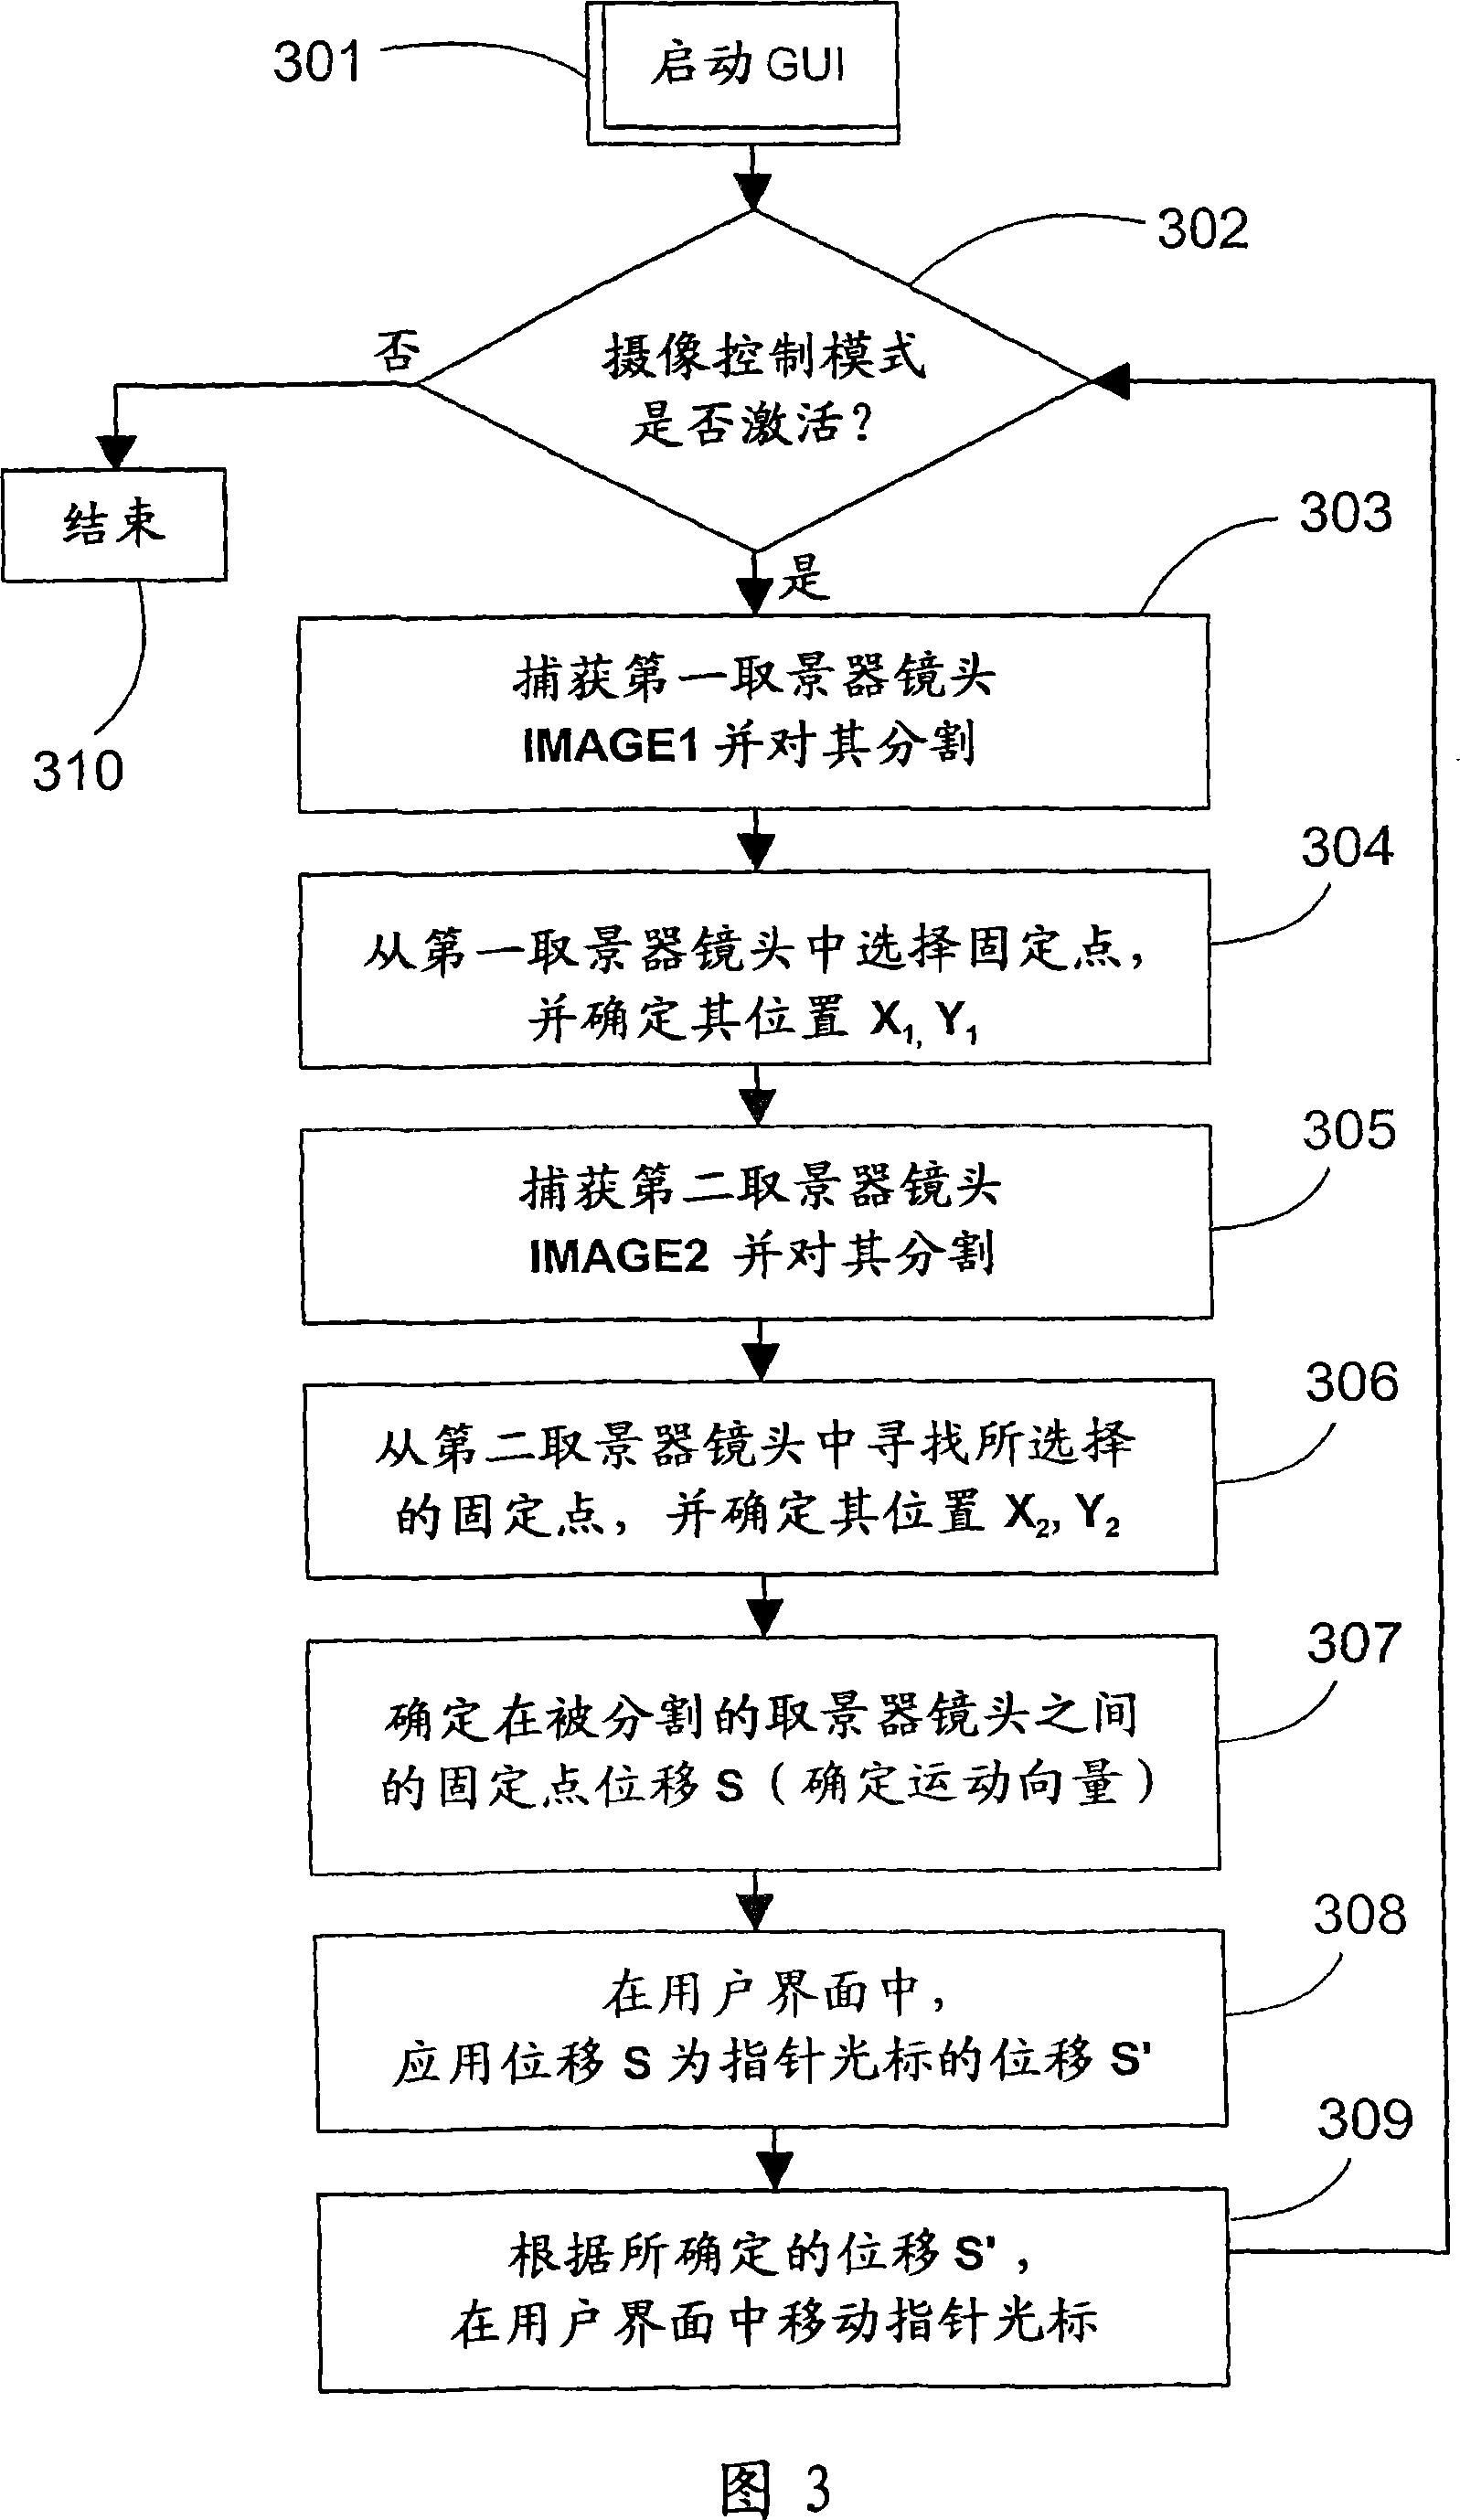 Electronic device and a method for controlling the functions of the electronic device as well as a program product for implementing the method